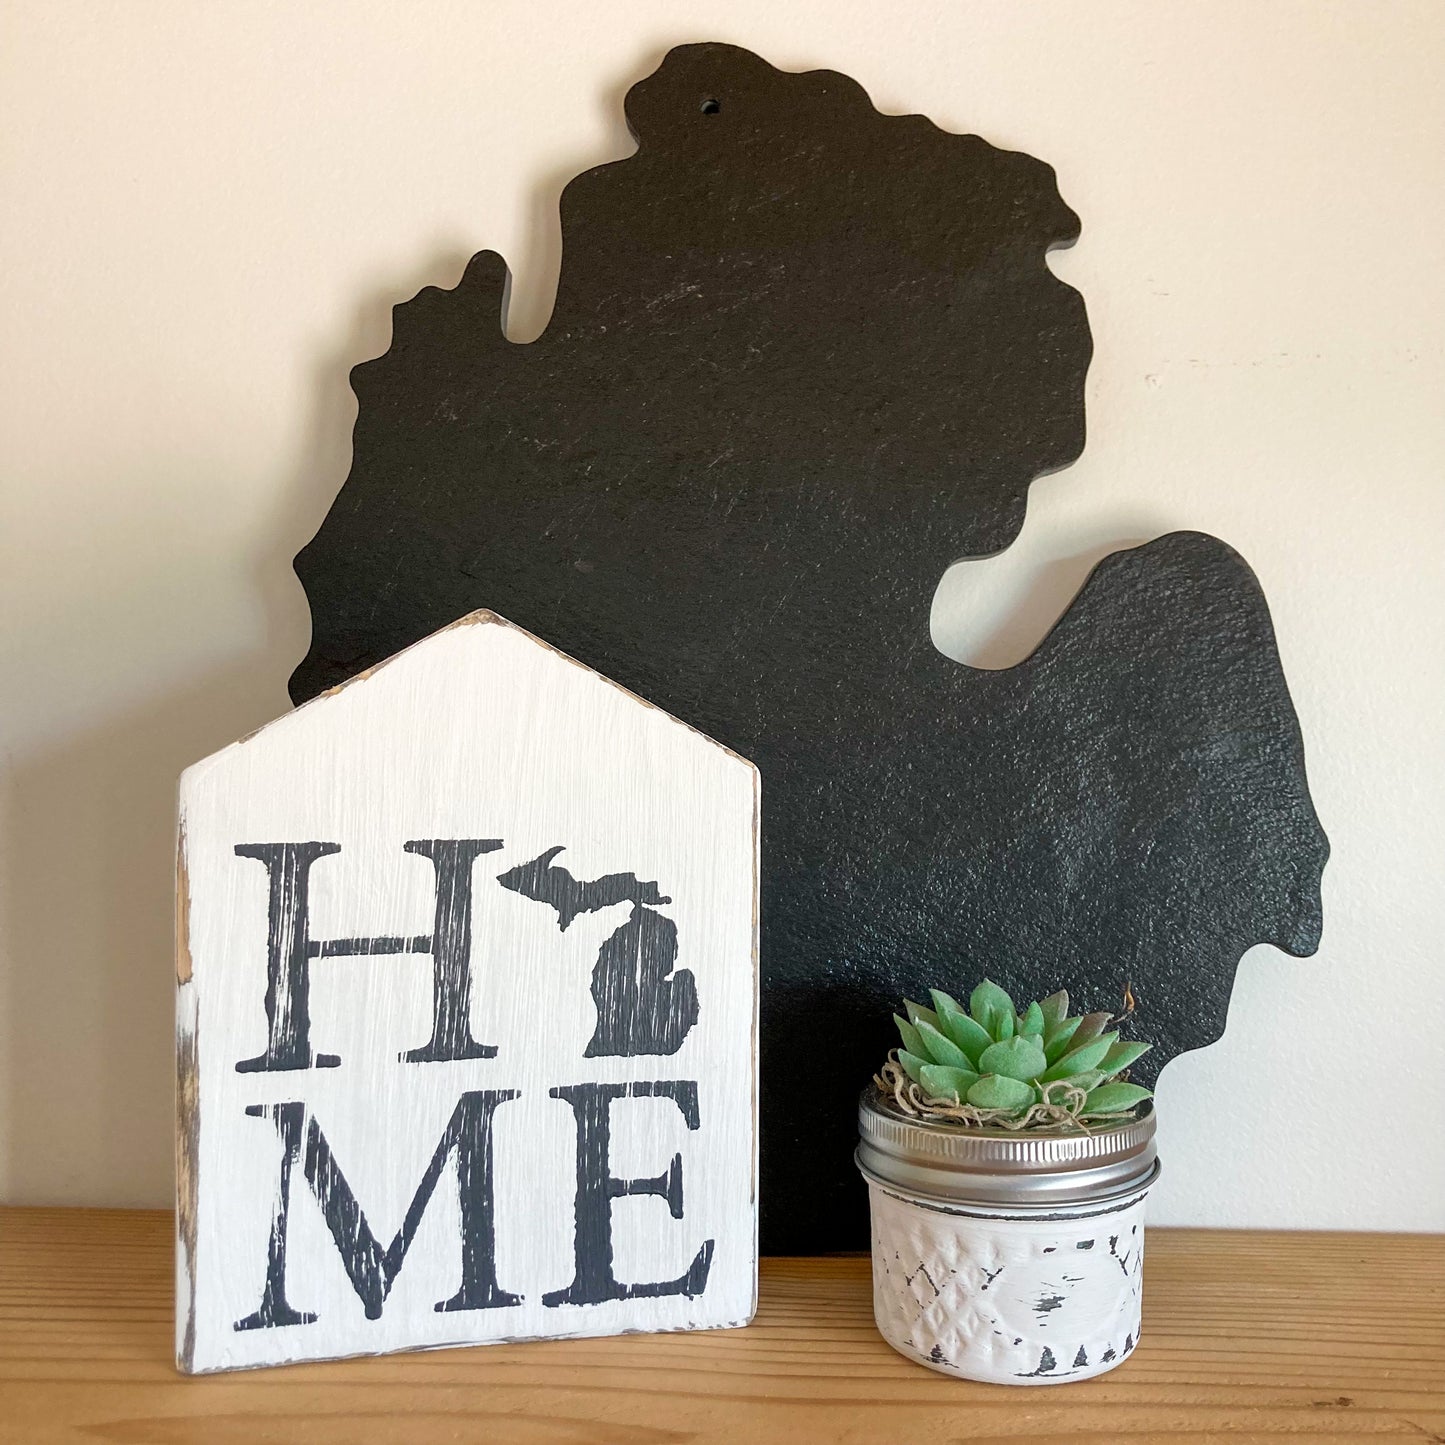 Handmade wood shaped distressed house painted white displaying word home with state of Michigan as the o painted in black approximatly 7 inches by 5 inches by 1.5 inches thick free standing shelf sitter